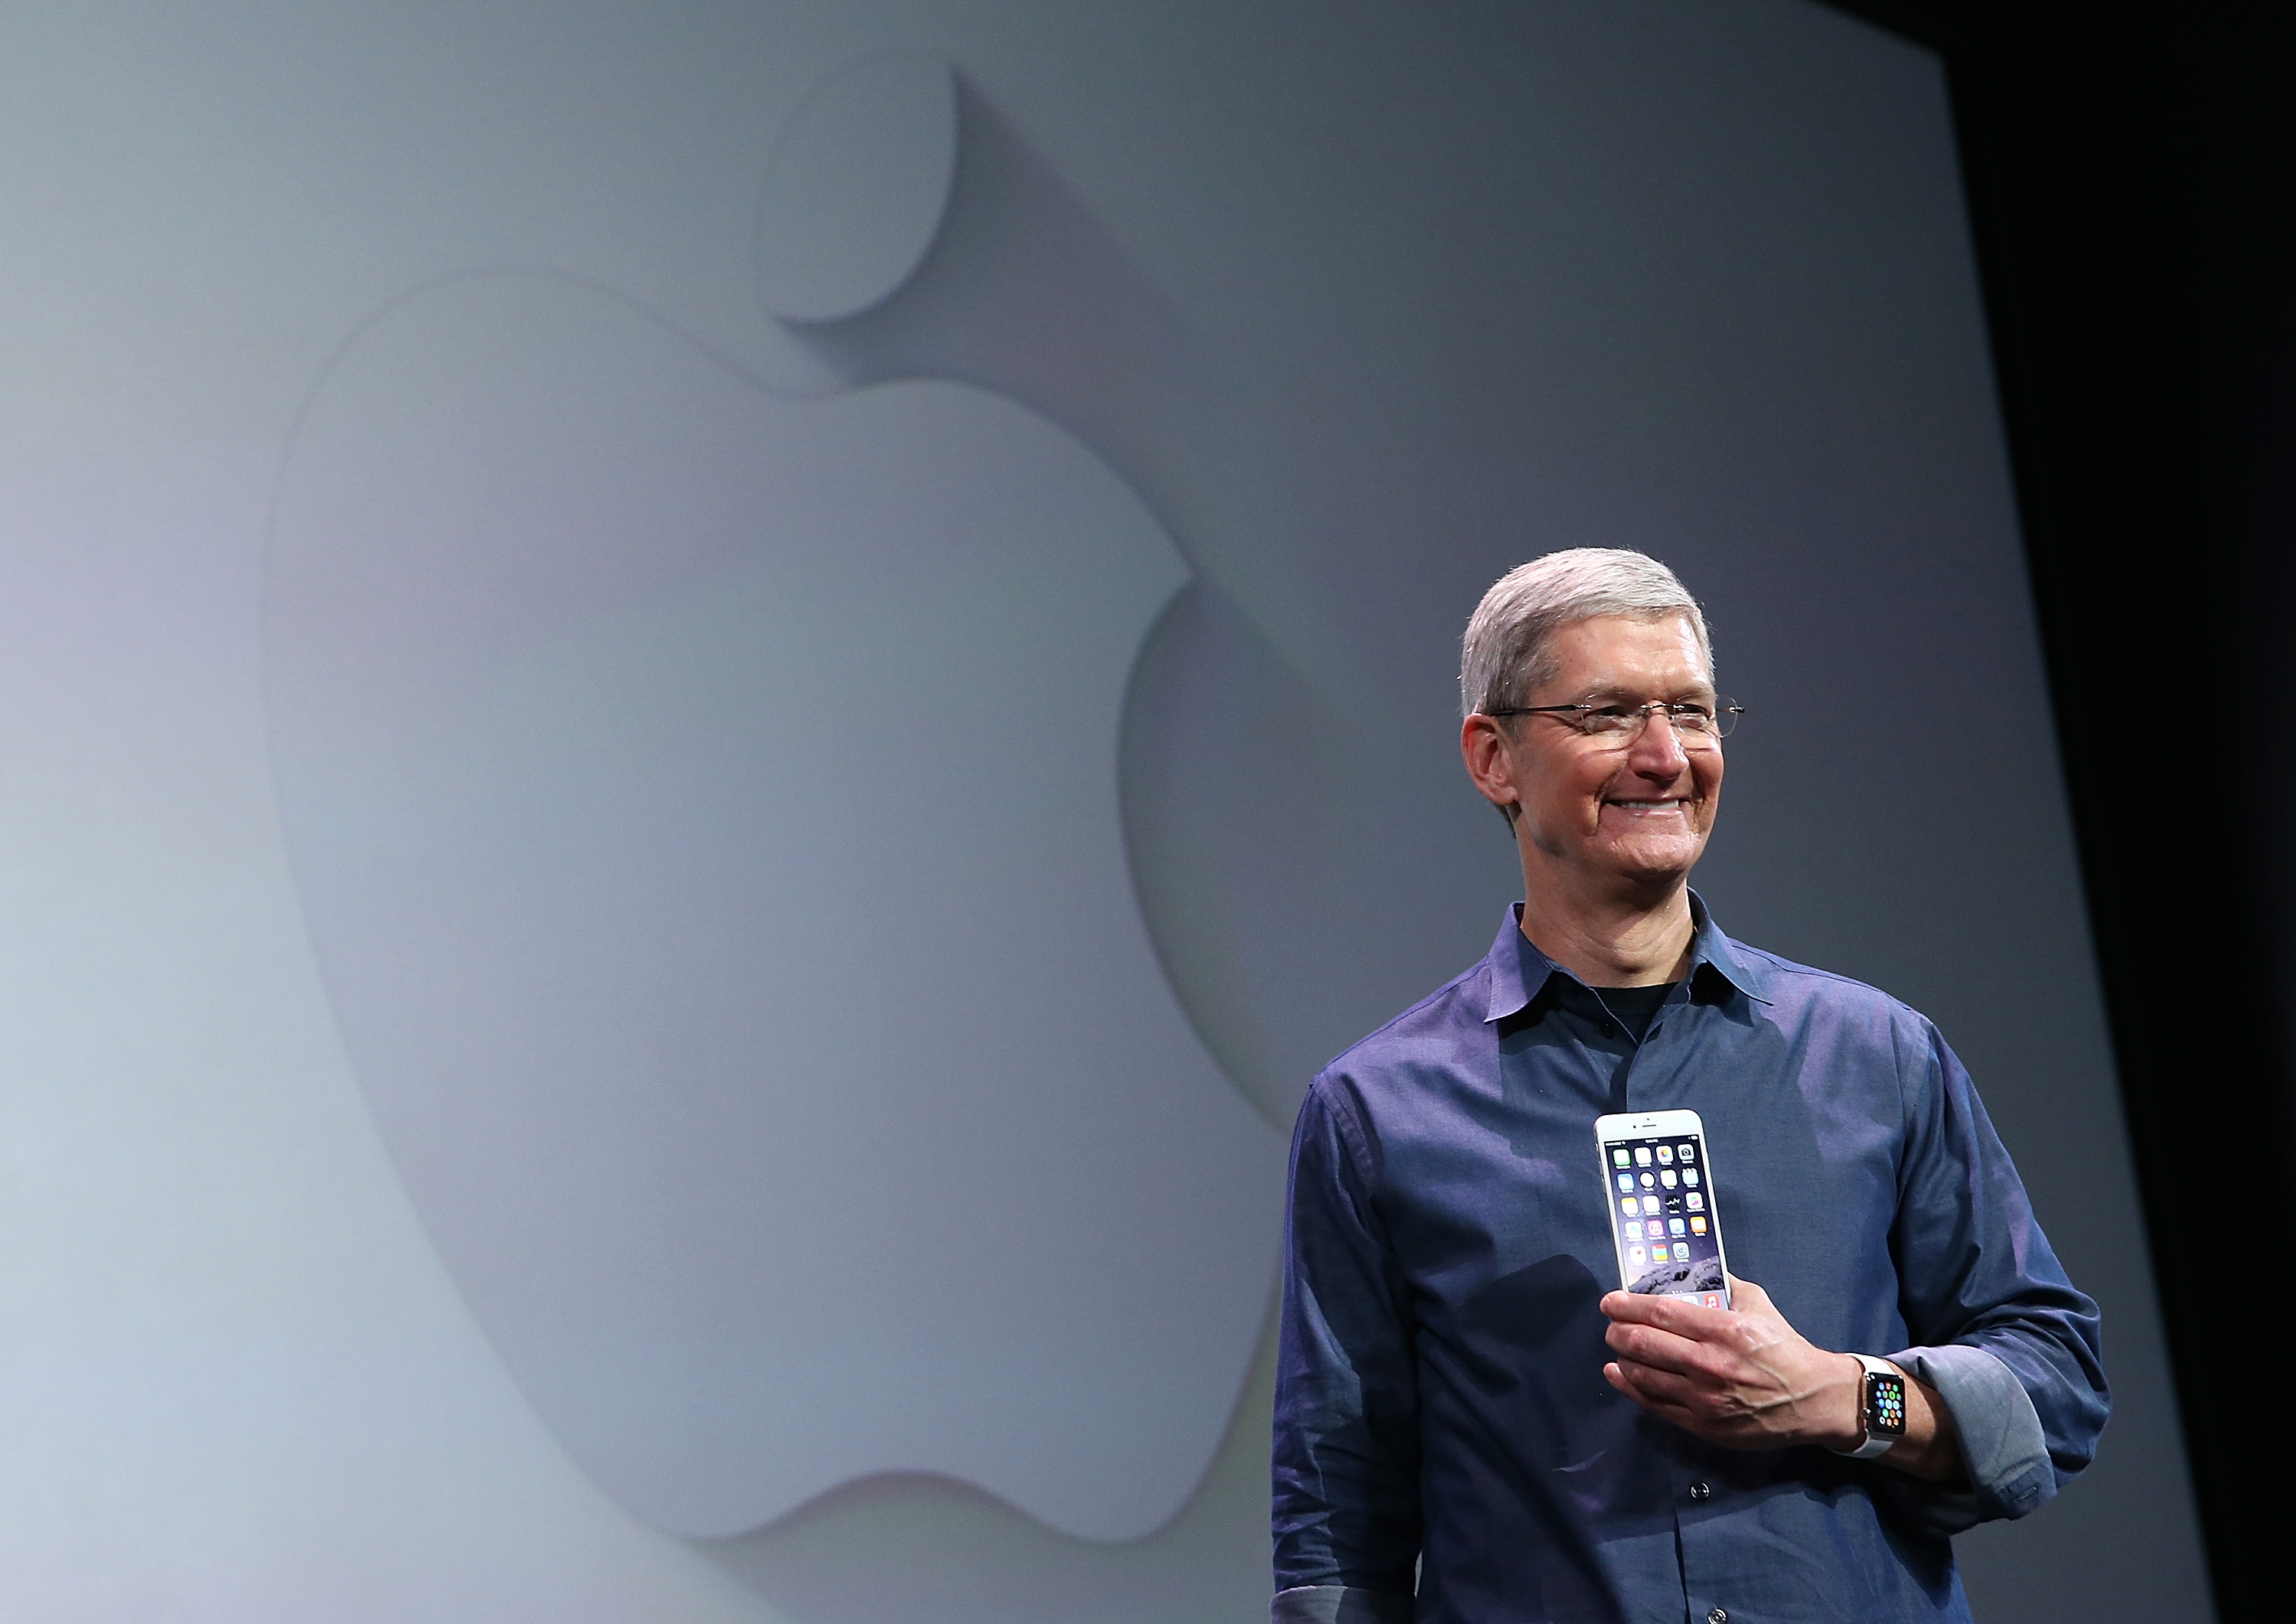 Apple CEO Tim Cook shows off the new iPhone 6 and the Apple Watch during an Apple special event at the Flint Center for the Performing Arts on September 9, 2014 in Cupertino, California. (Justin Sullivan&mdash;Getty Images)